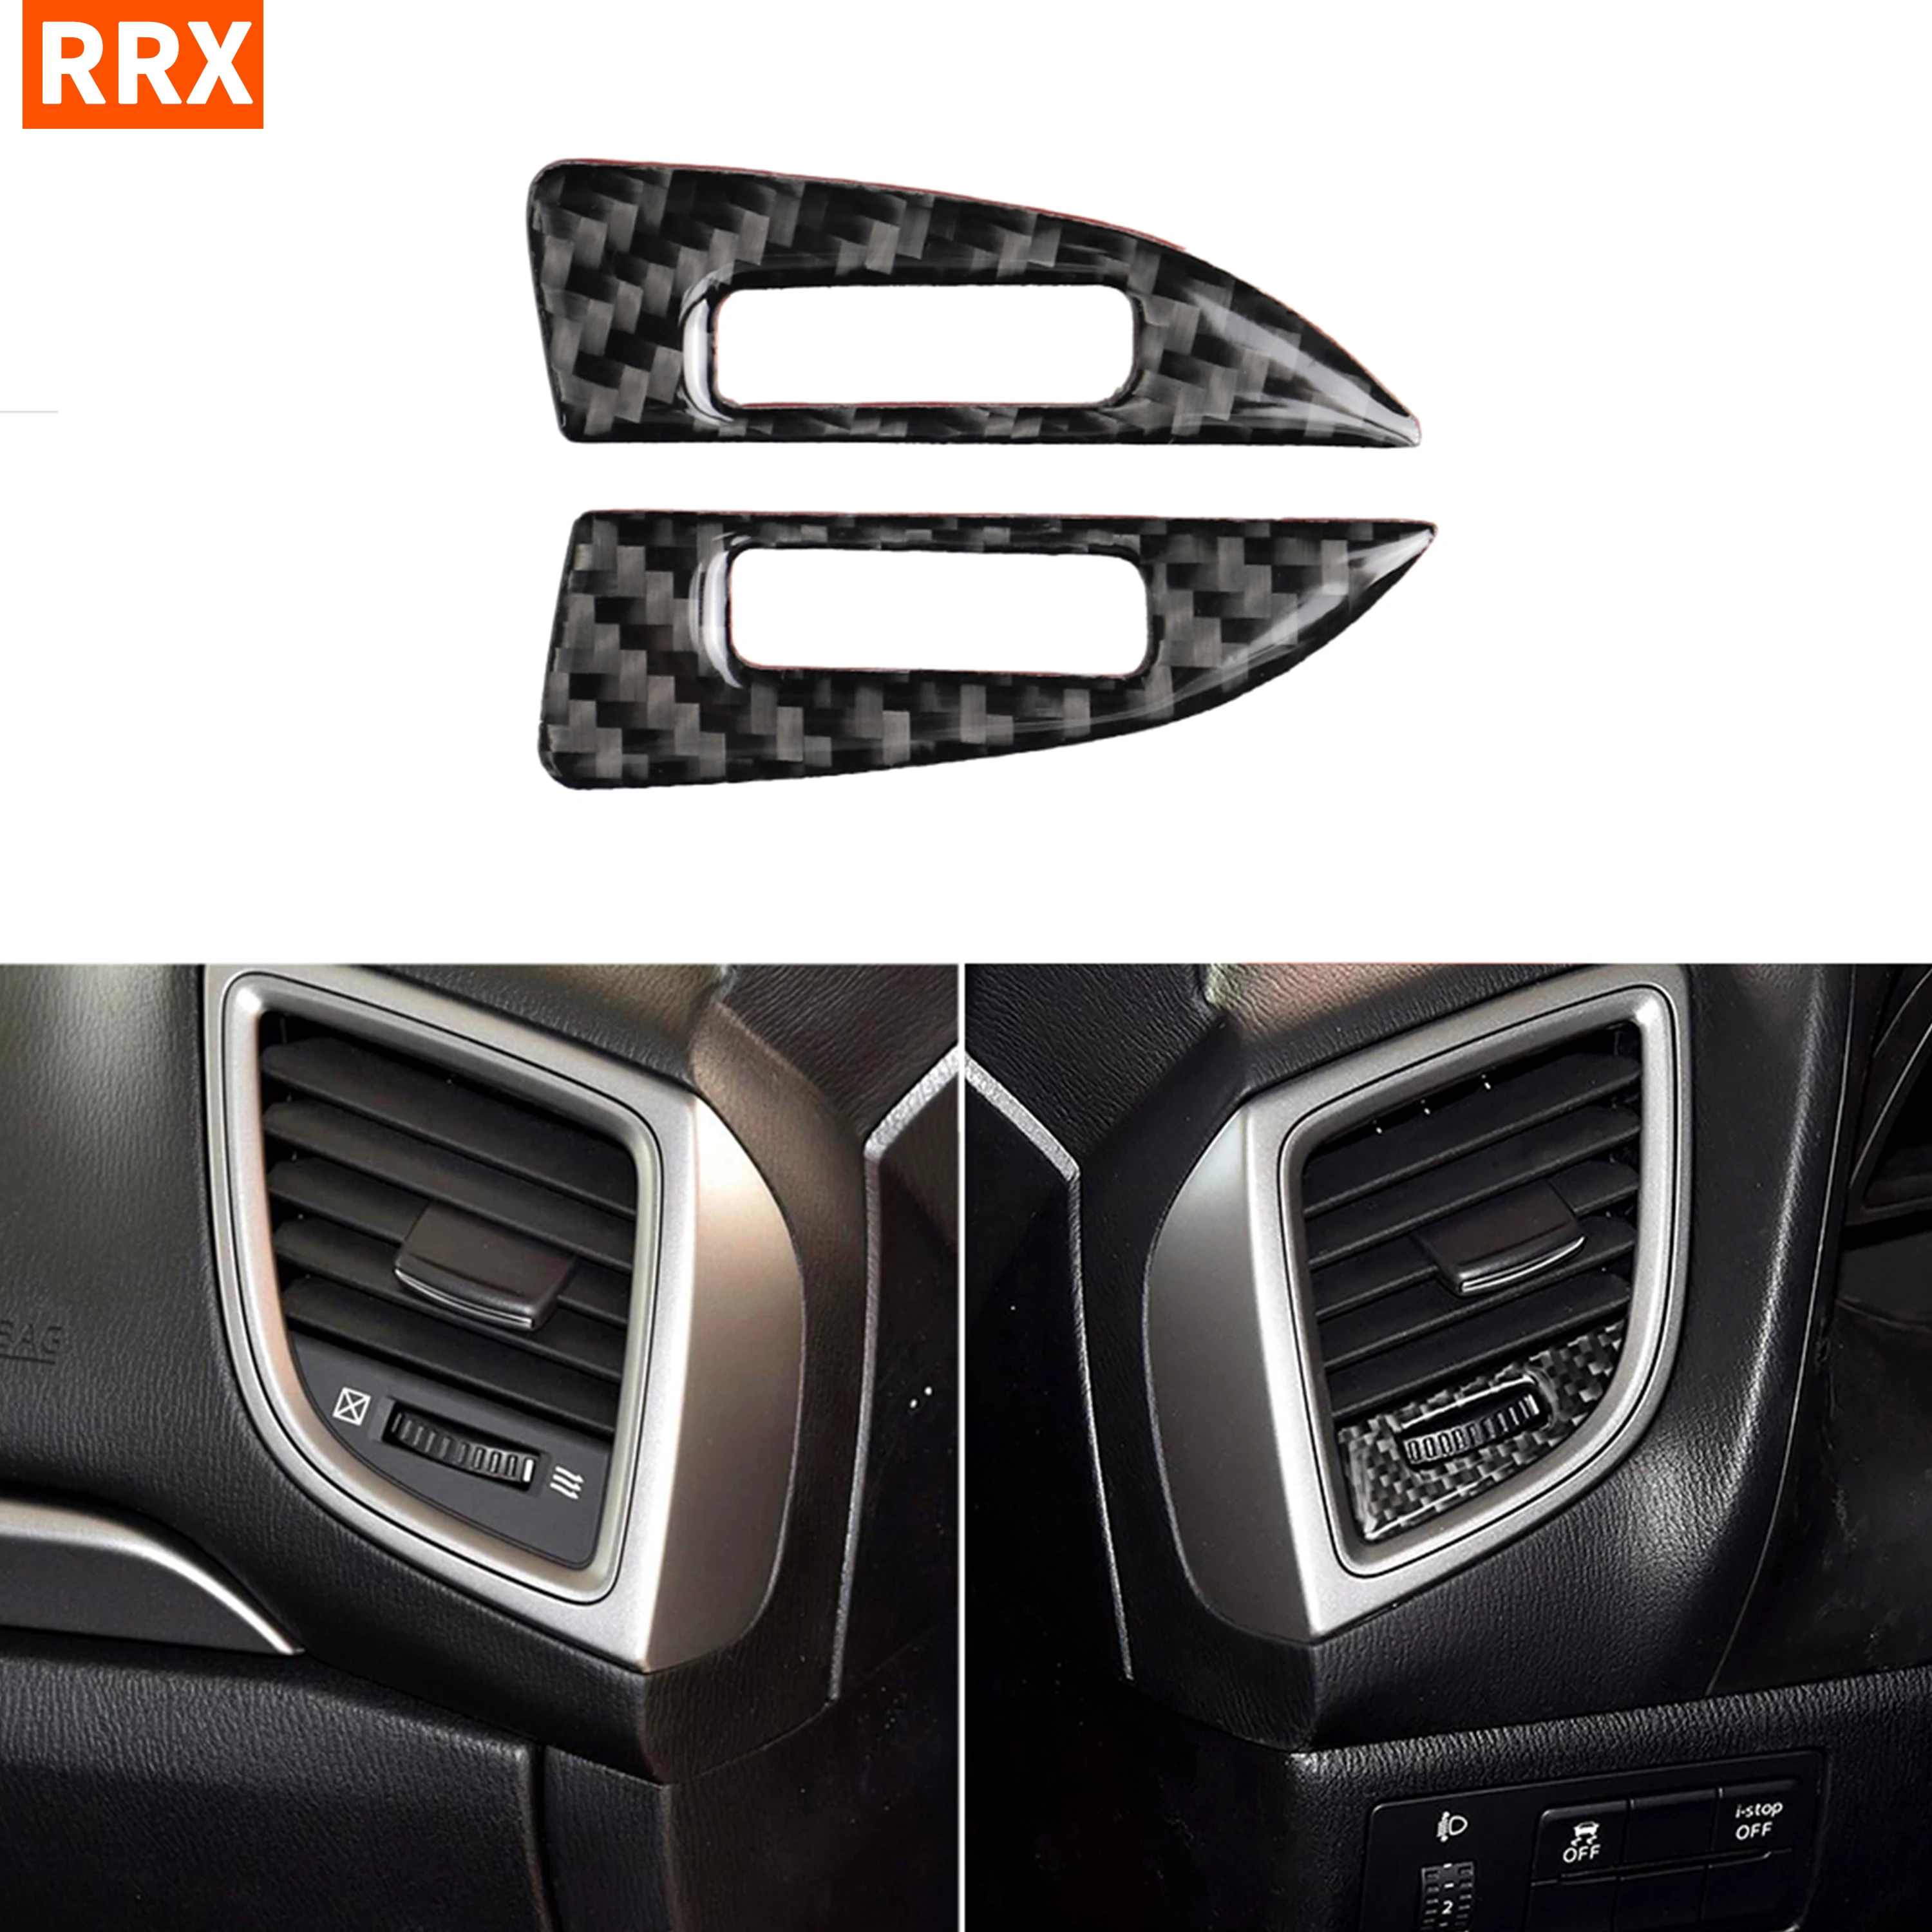 

For Mazda3 Mazda 3 Axela BN BM 2014-2018 Car Accessories Carbon Fiber Air Conditioning Vent Outlet Adjust Button Cover Sticker